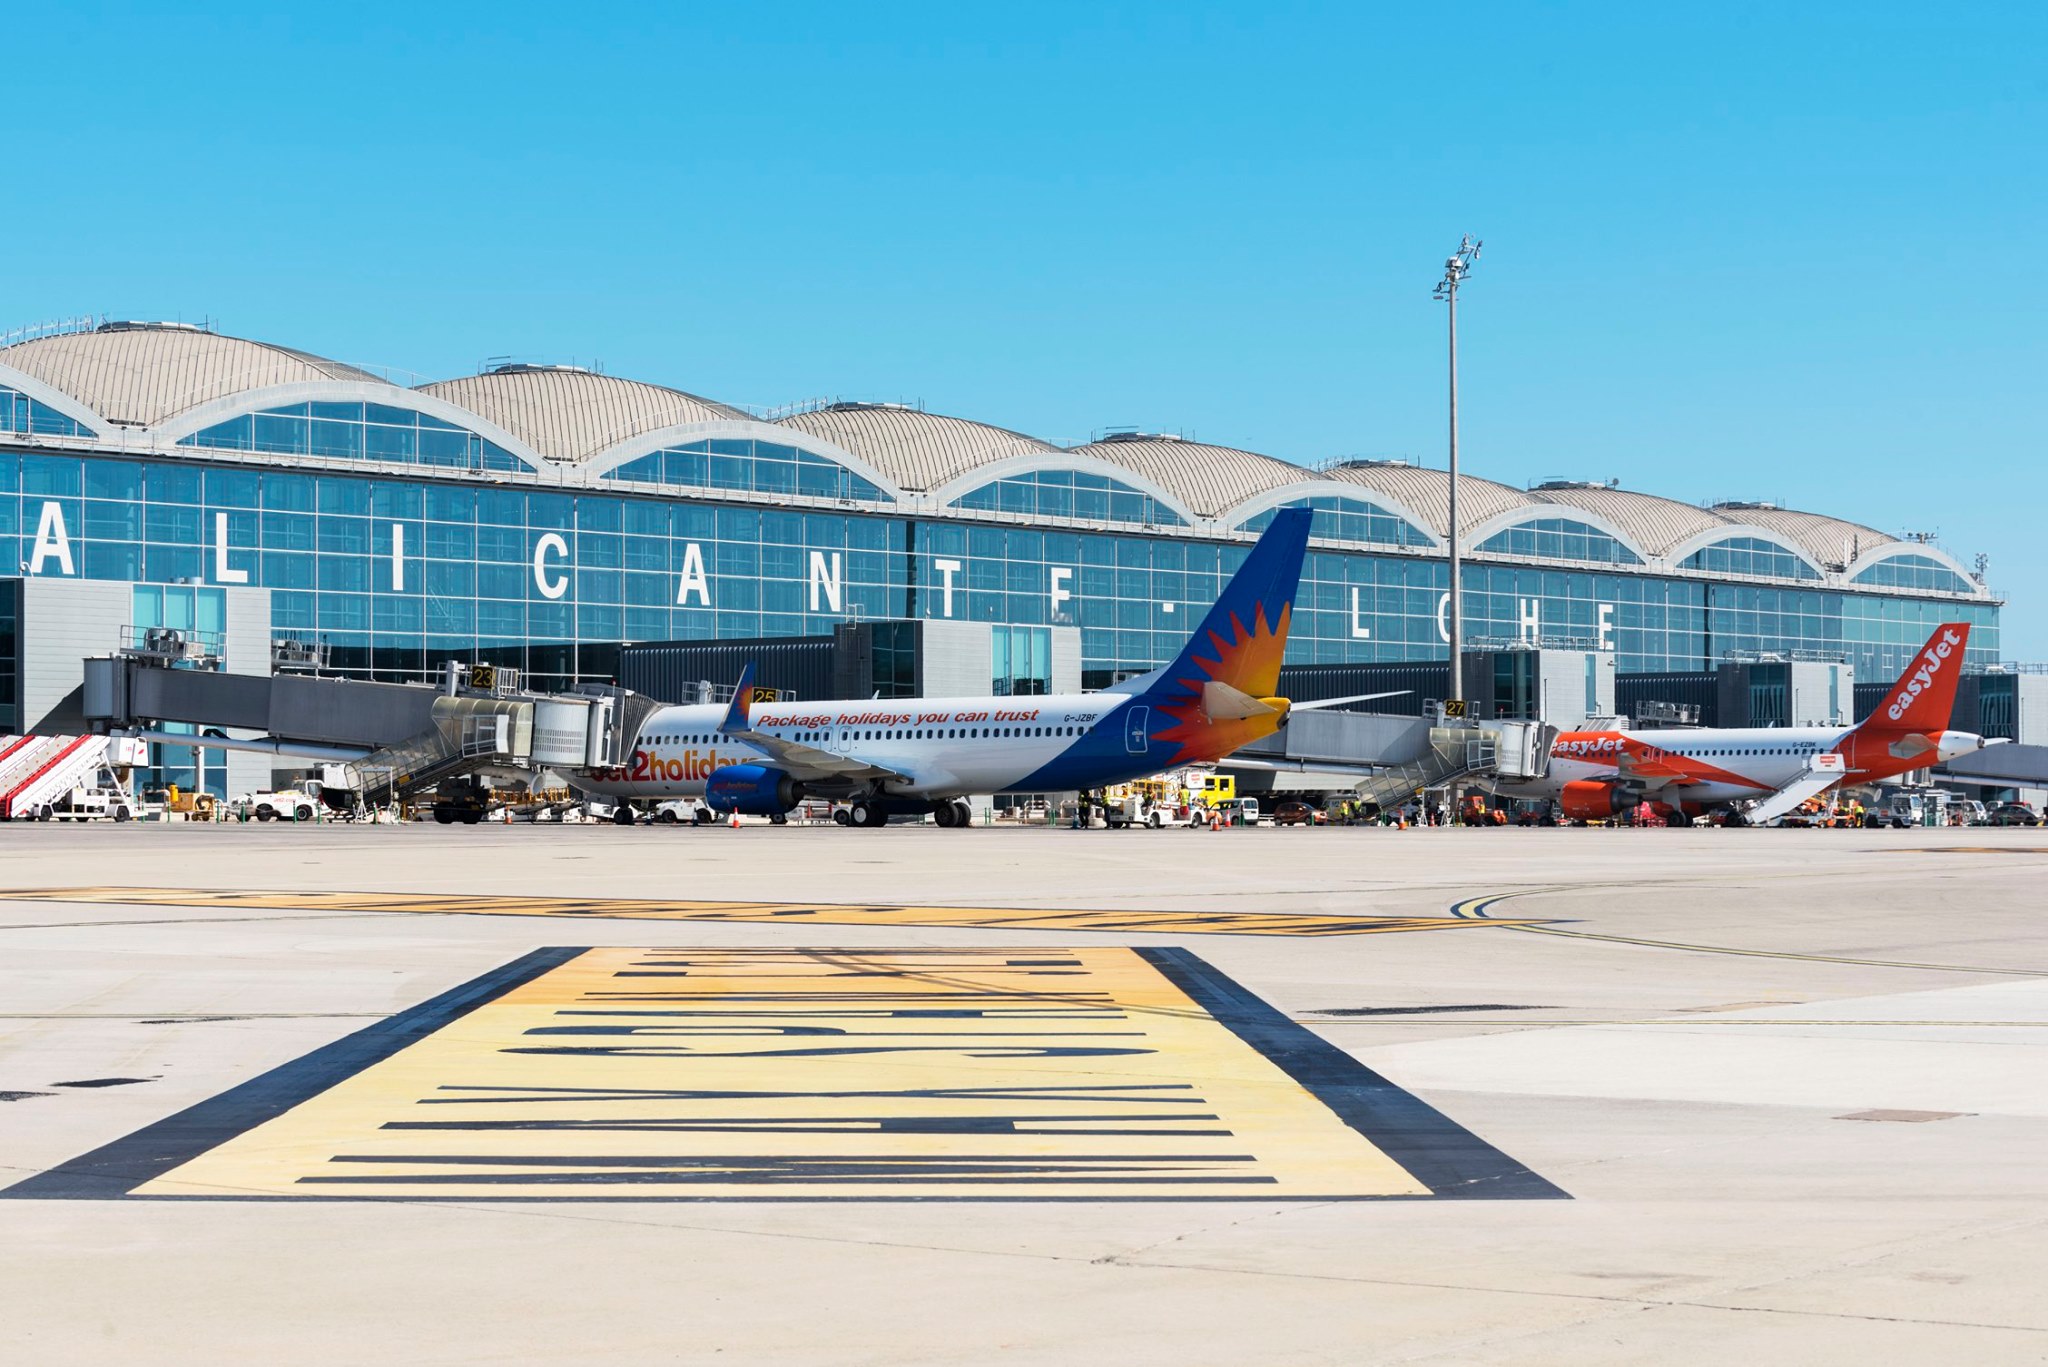 Airport expansions in Spain: Both Alicante and Valencia will increase their capacity following record-breaking passenger numbers this year